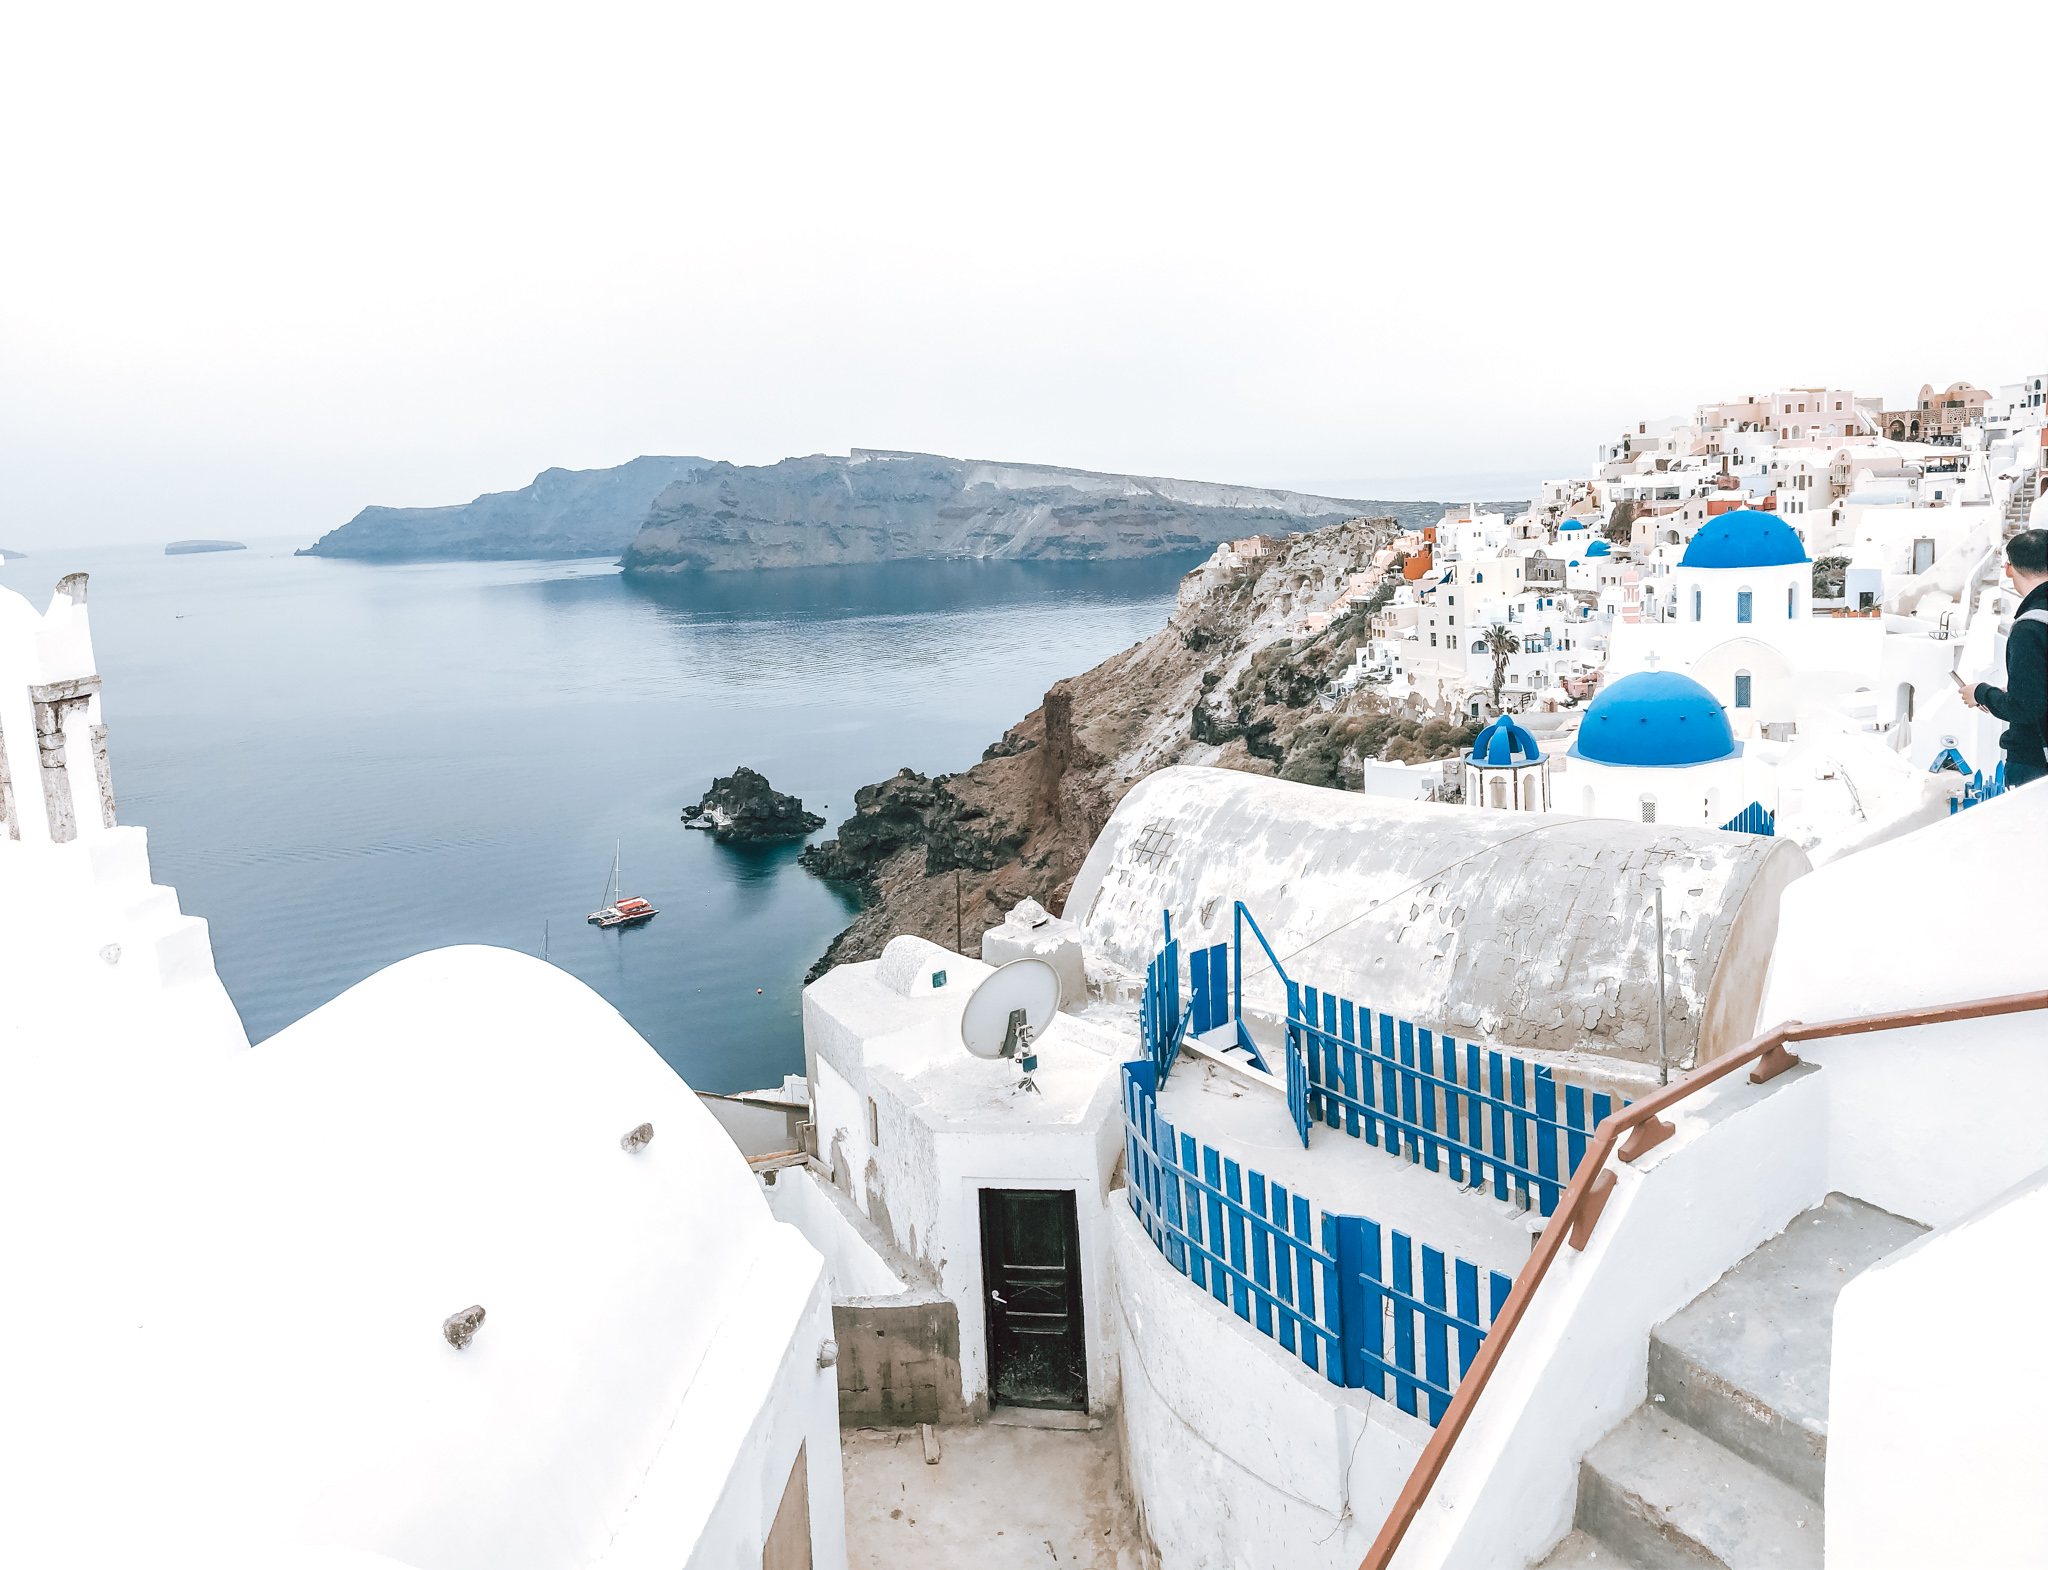 Santorini Greece View with Blue Top Buildings and Water